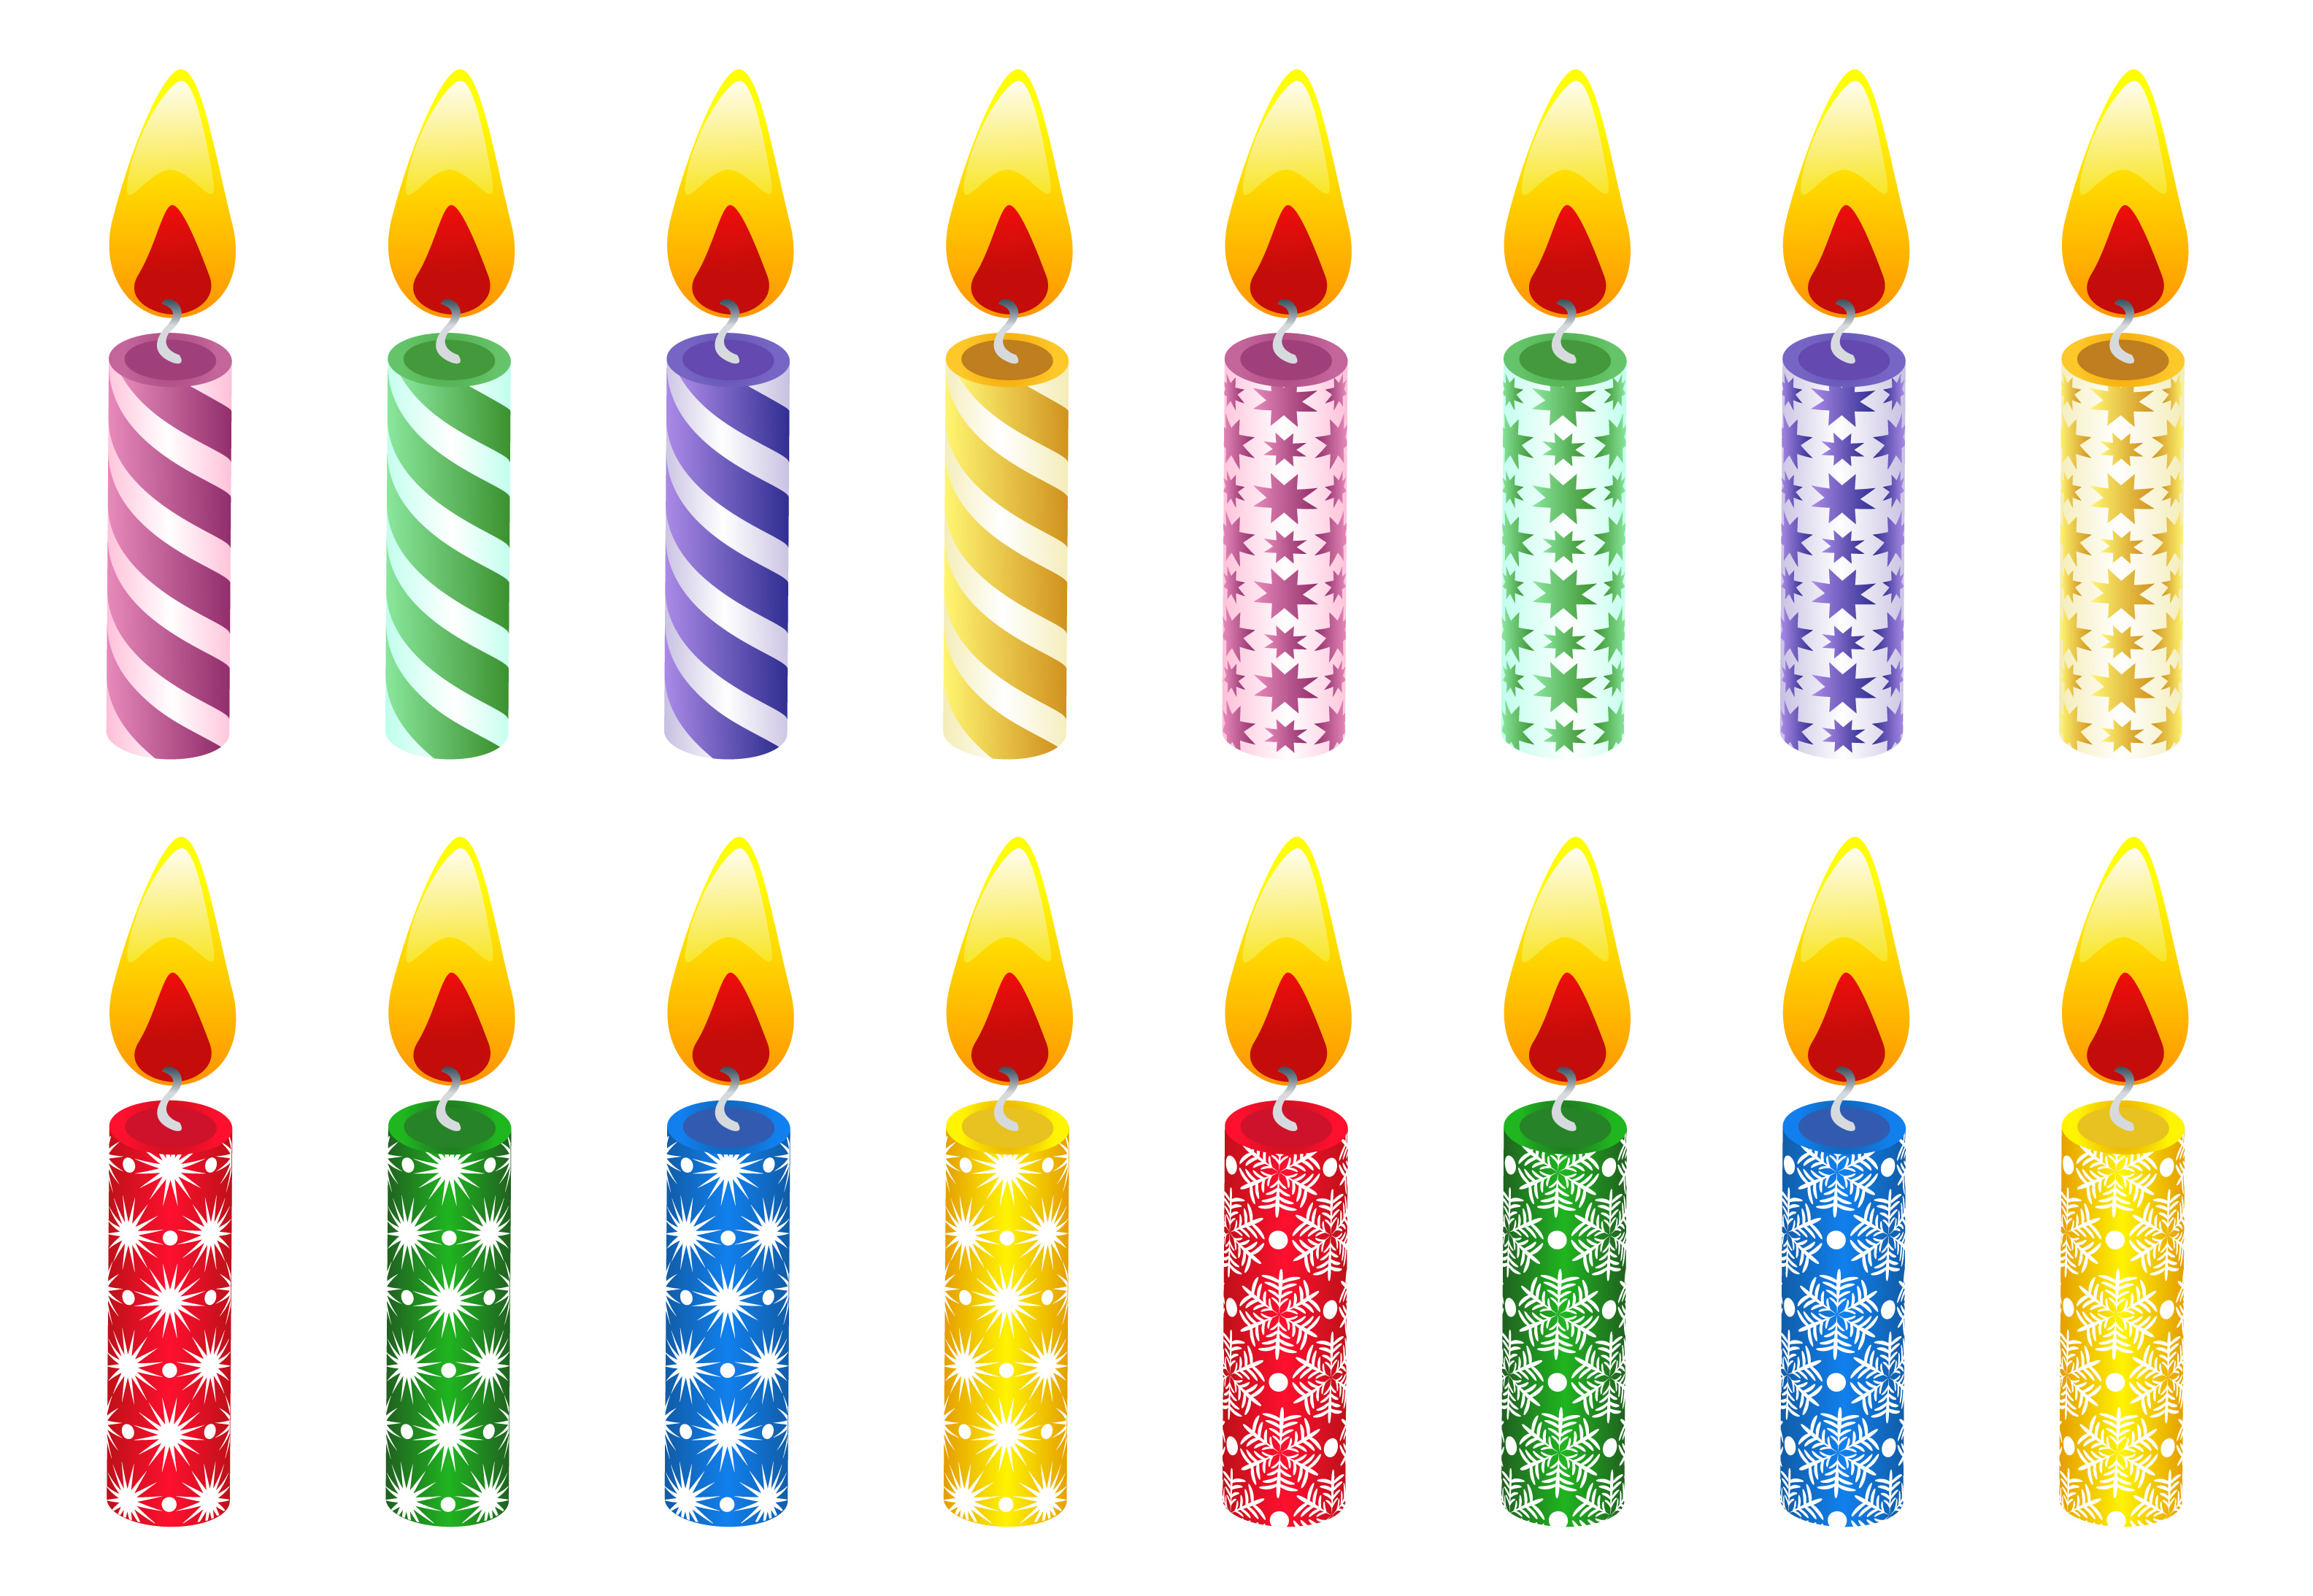 This Is A Great Set Of Birthday Candles To Use For Games Or Classroom